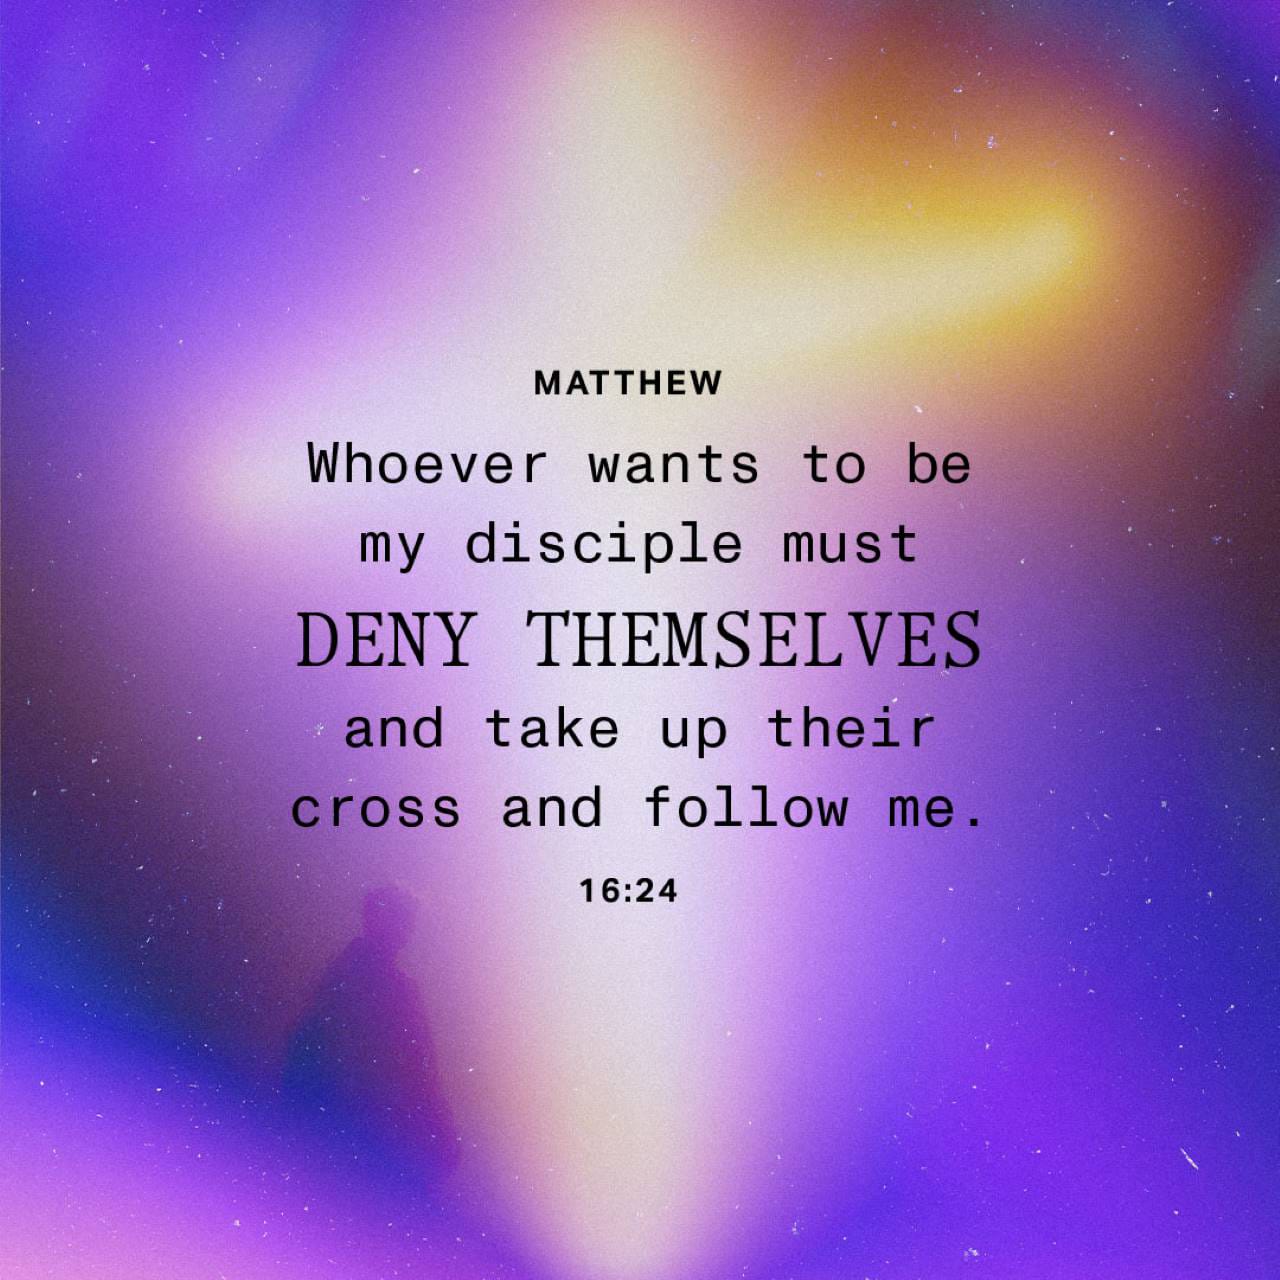 Matthew 16:24-26 Then Jesus said to His disciples, “If anyone wishes to  come after Me, he must deny himself, and take up his cross and follow Me.  For whoever wishes to save